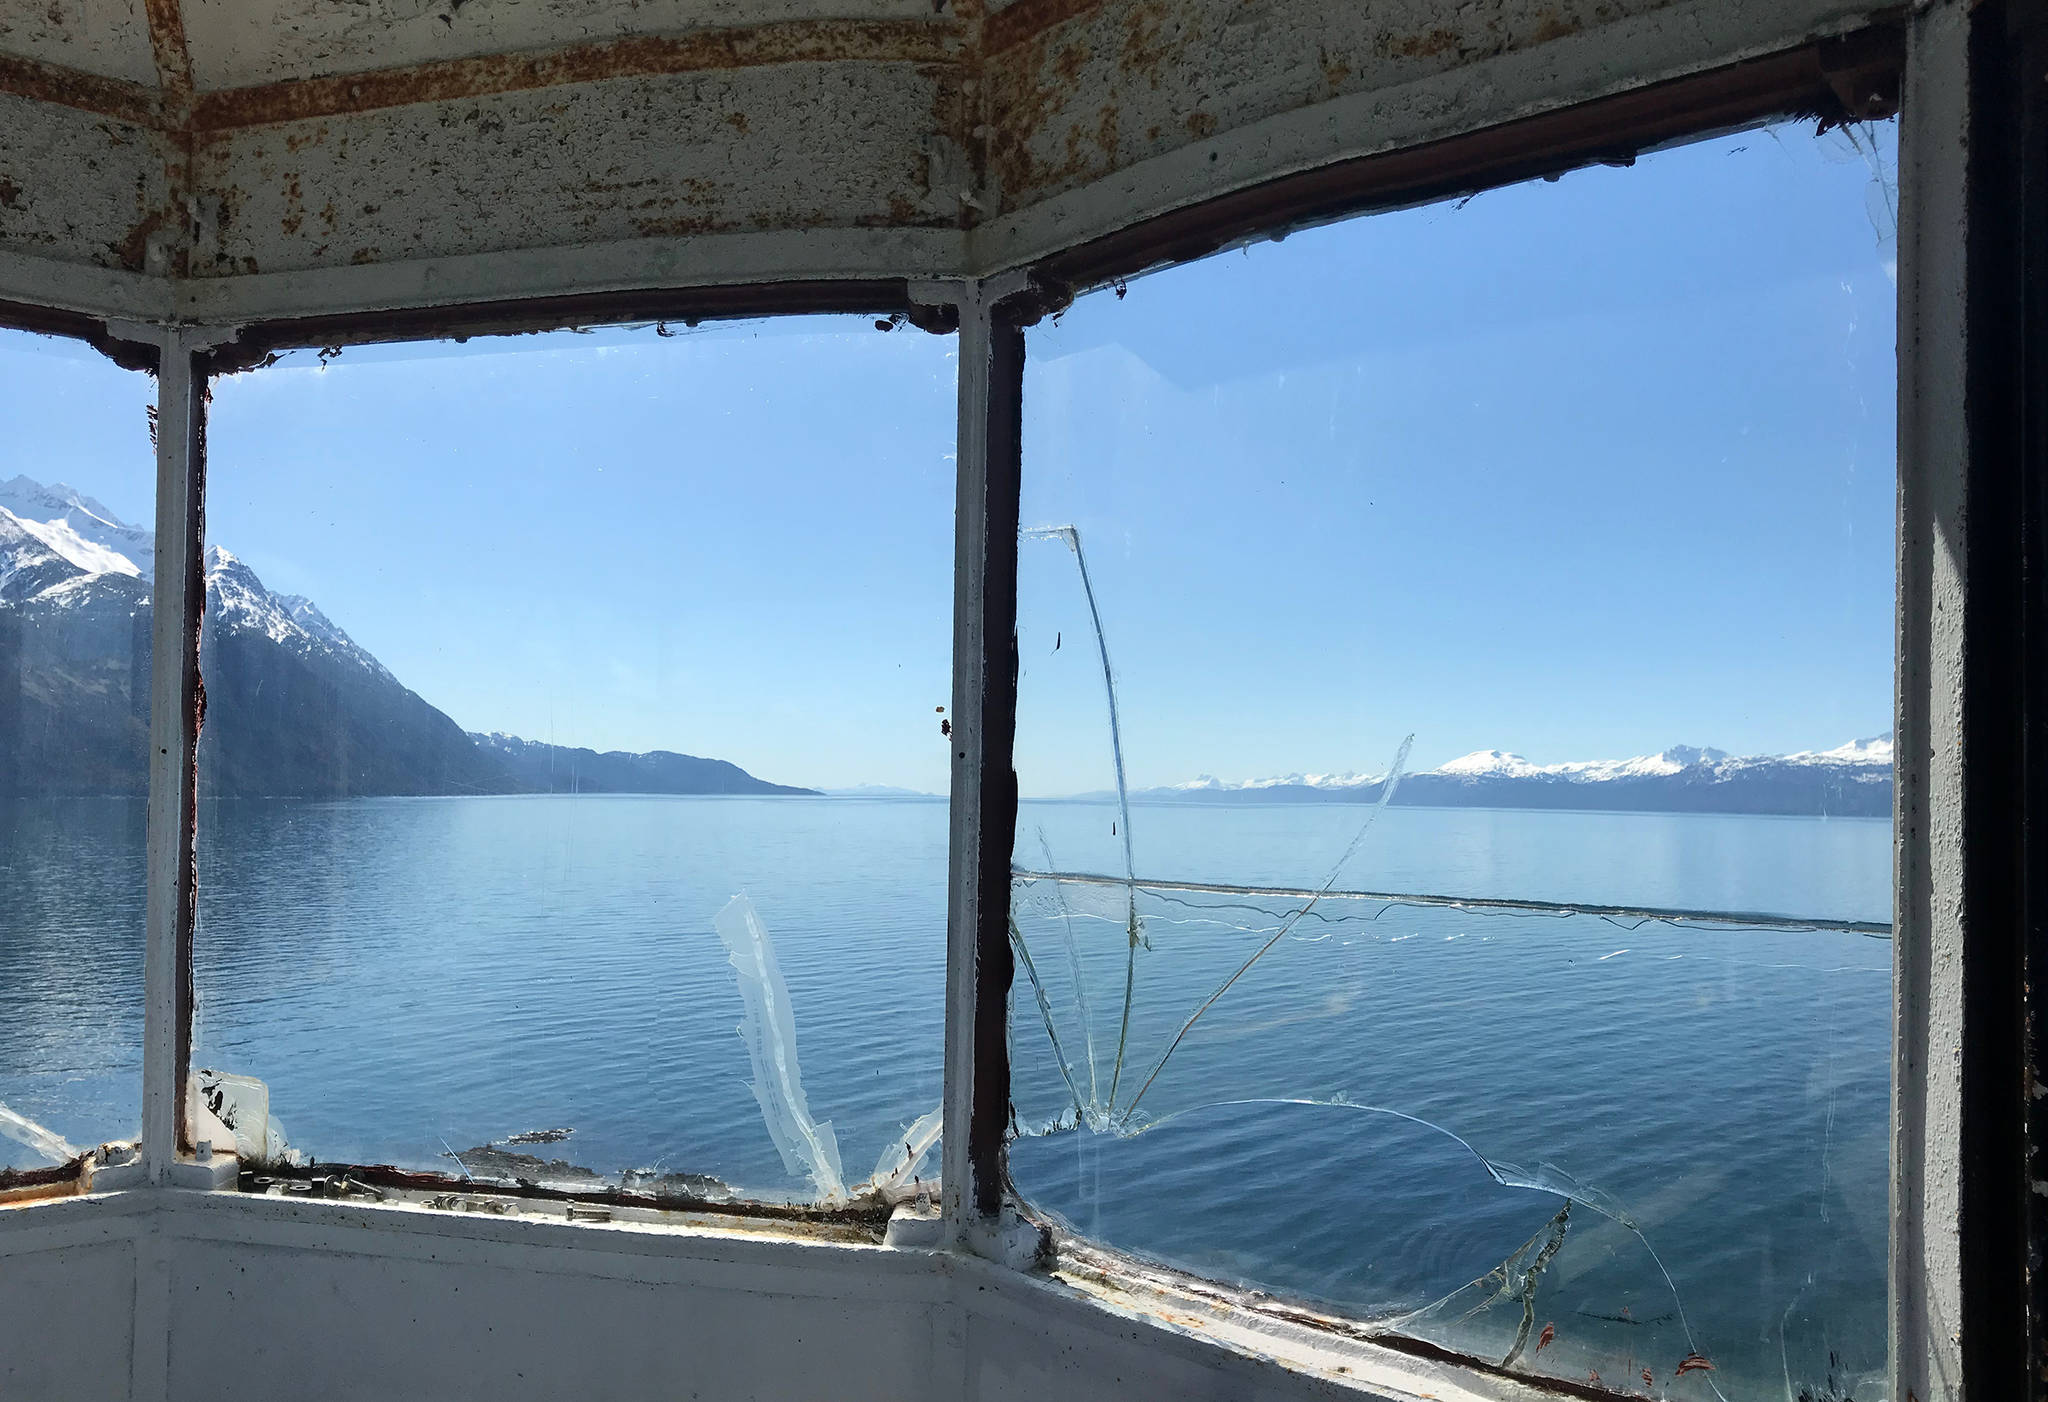 Cracks spread across the windows in the culpola at Eldred Rock Lighthouse on Monday, April 29, 2019. (Alex McCarthy | Juneau Empire)